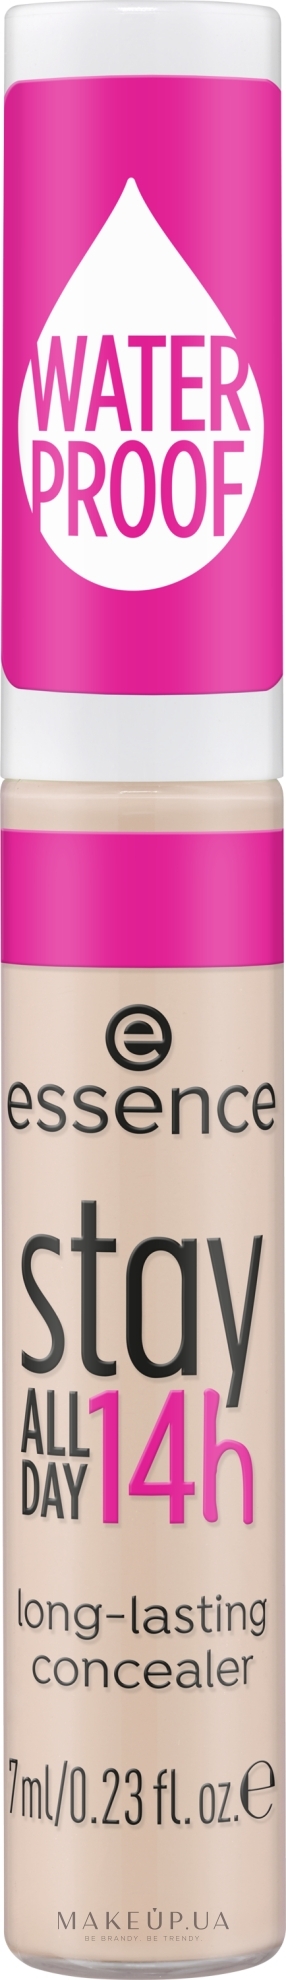 Essence Stay All Day 14h Long-lasting Concealer